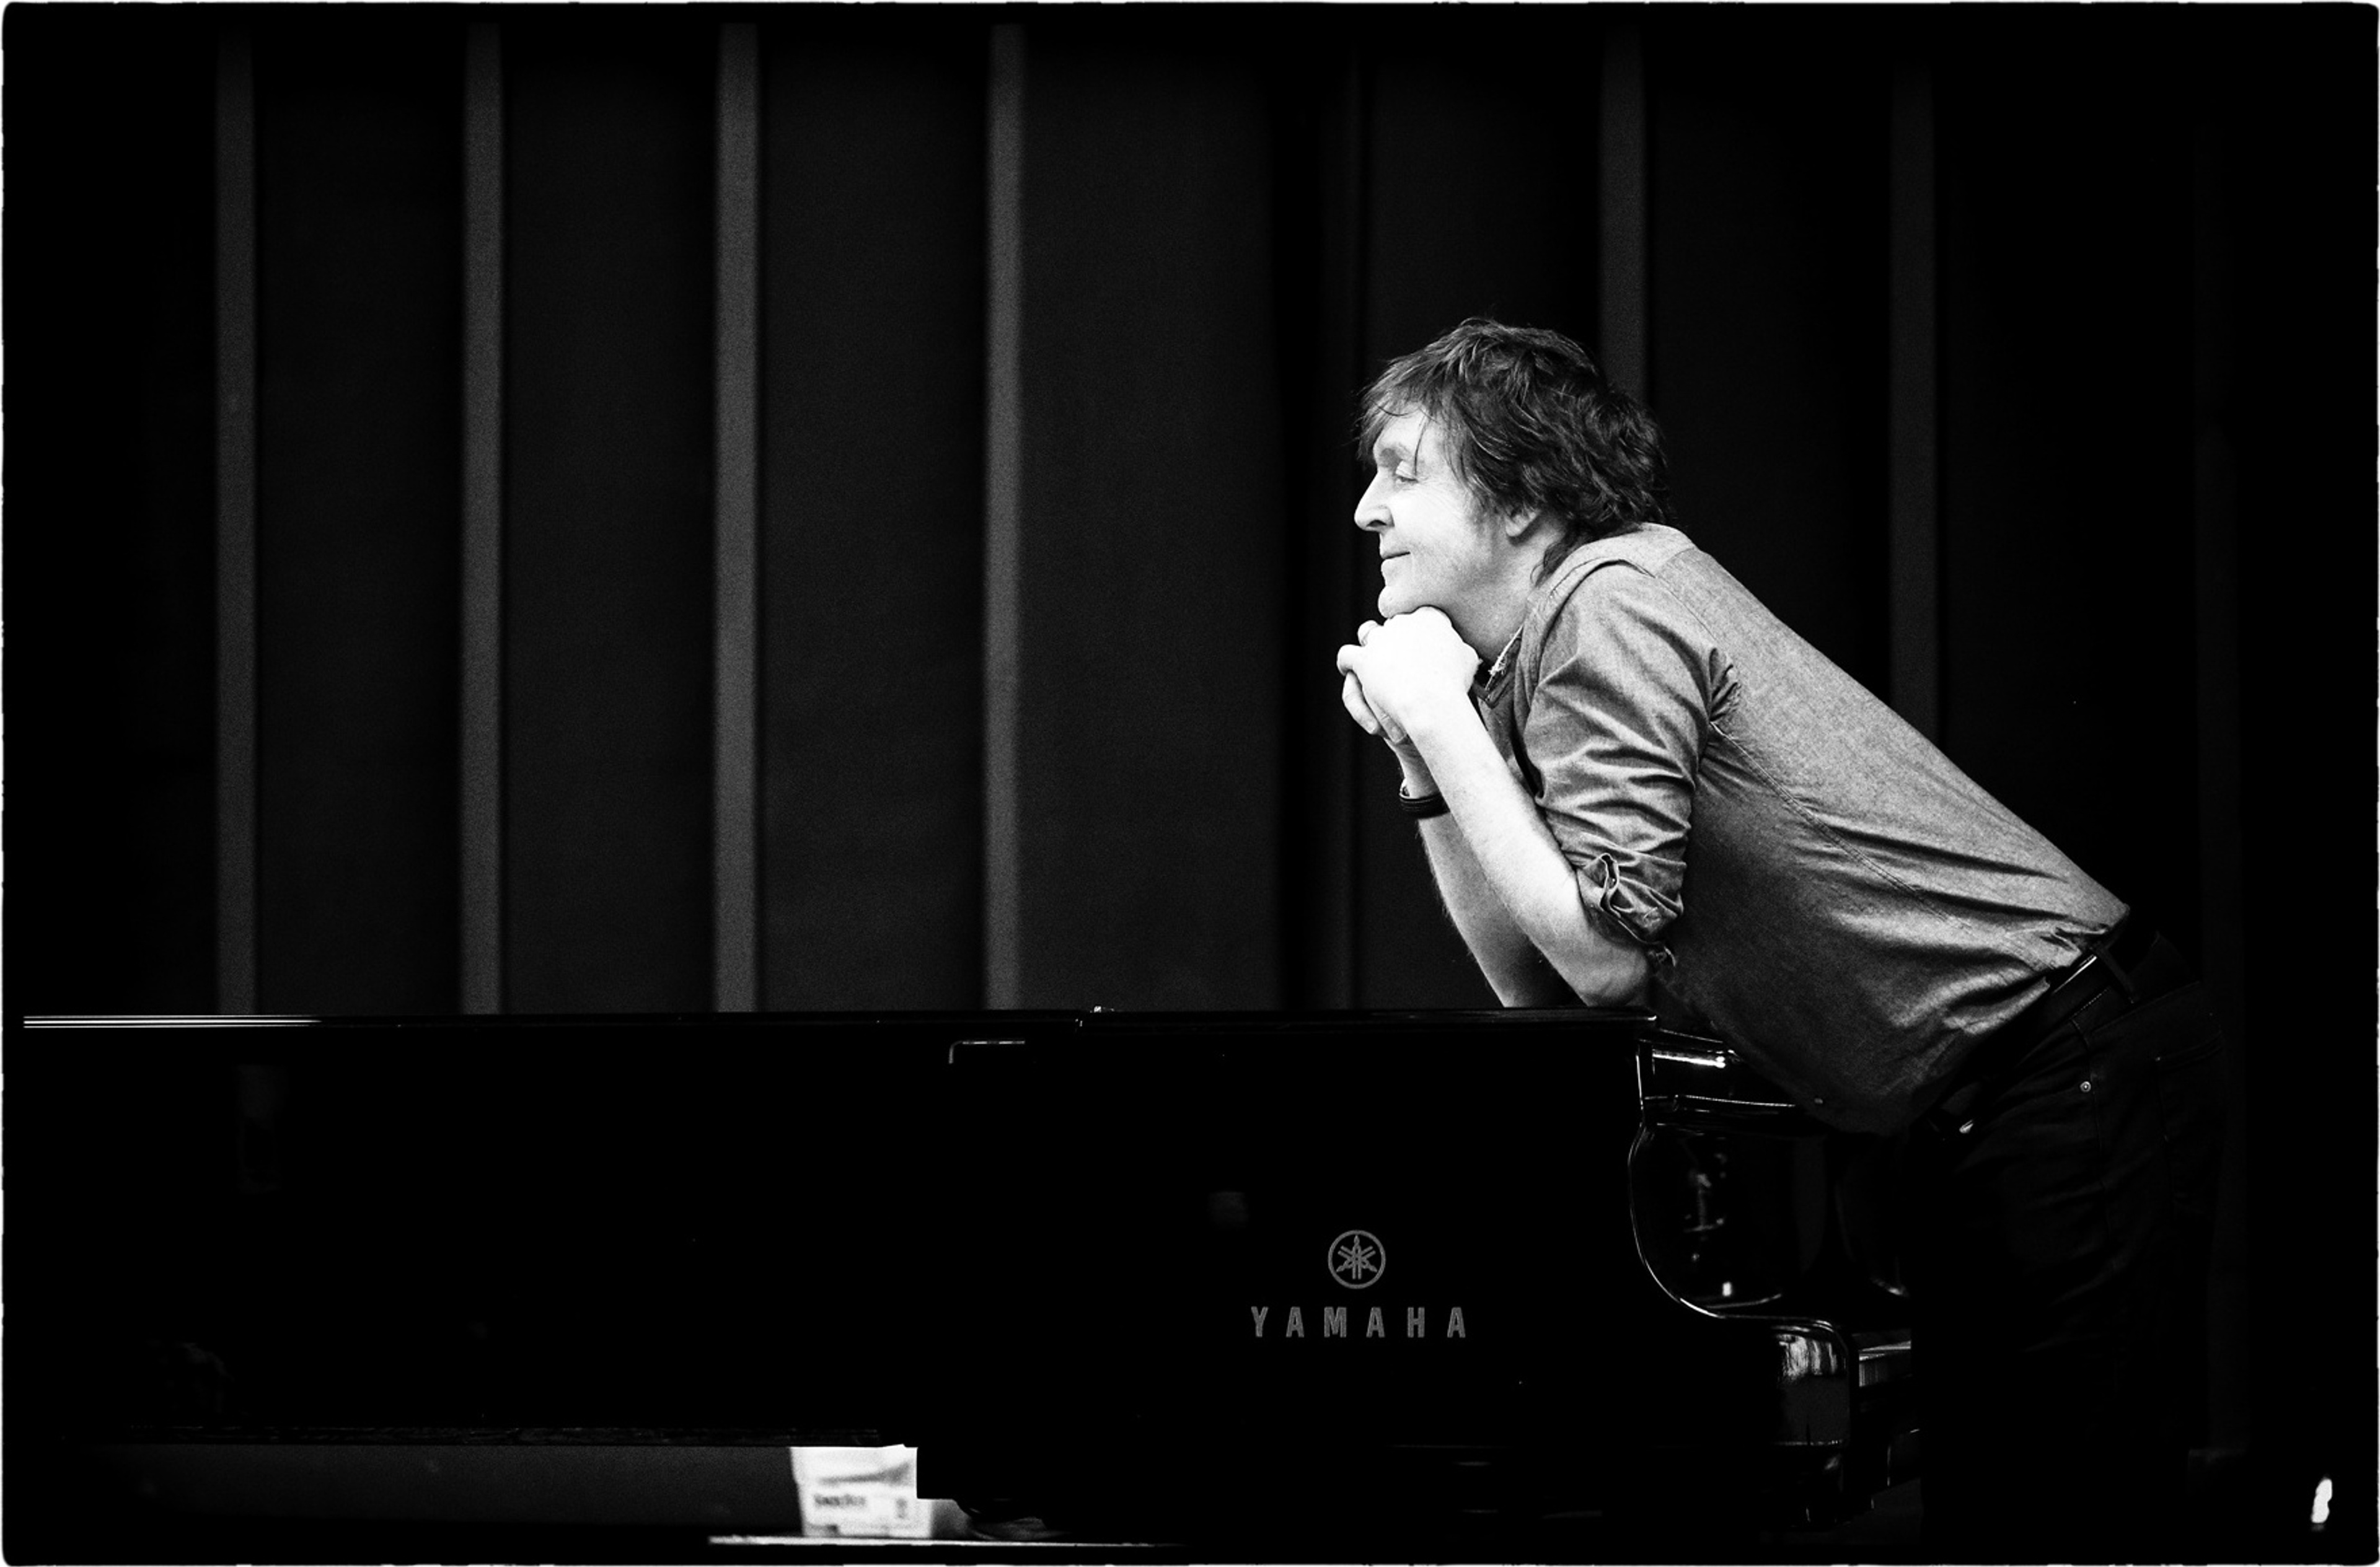 Paul at his piano during rehearsals, Los Angeles, April 13th 2013